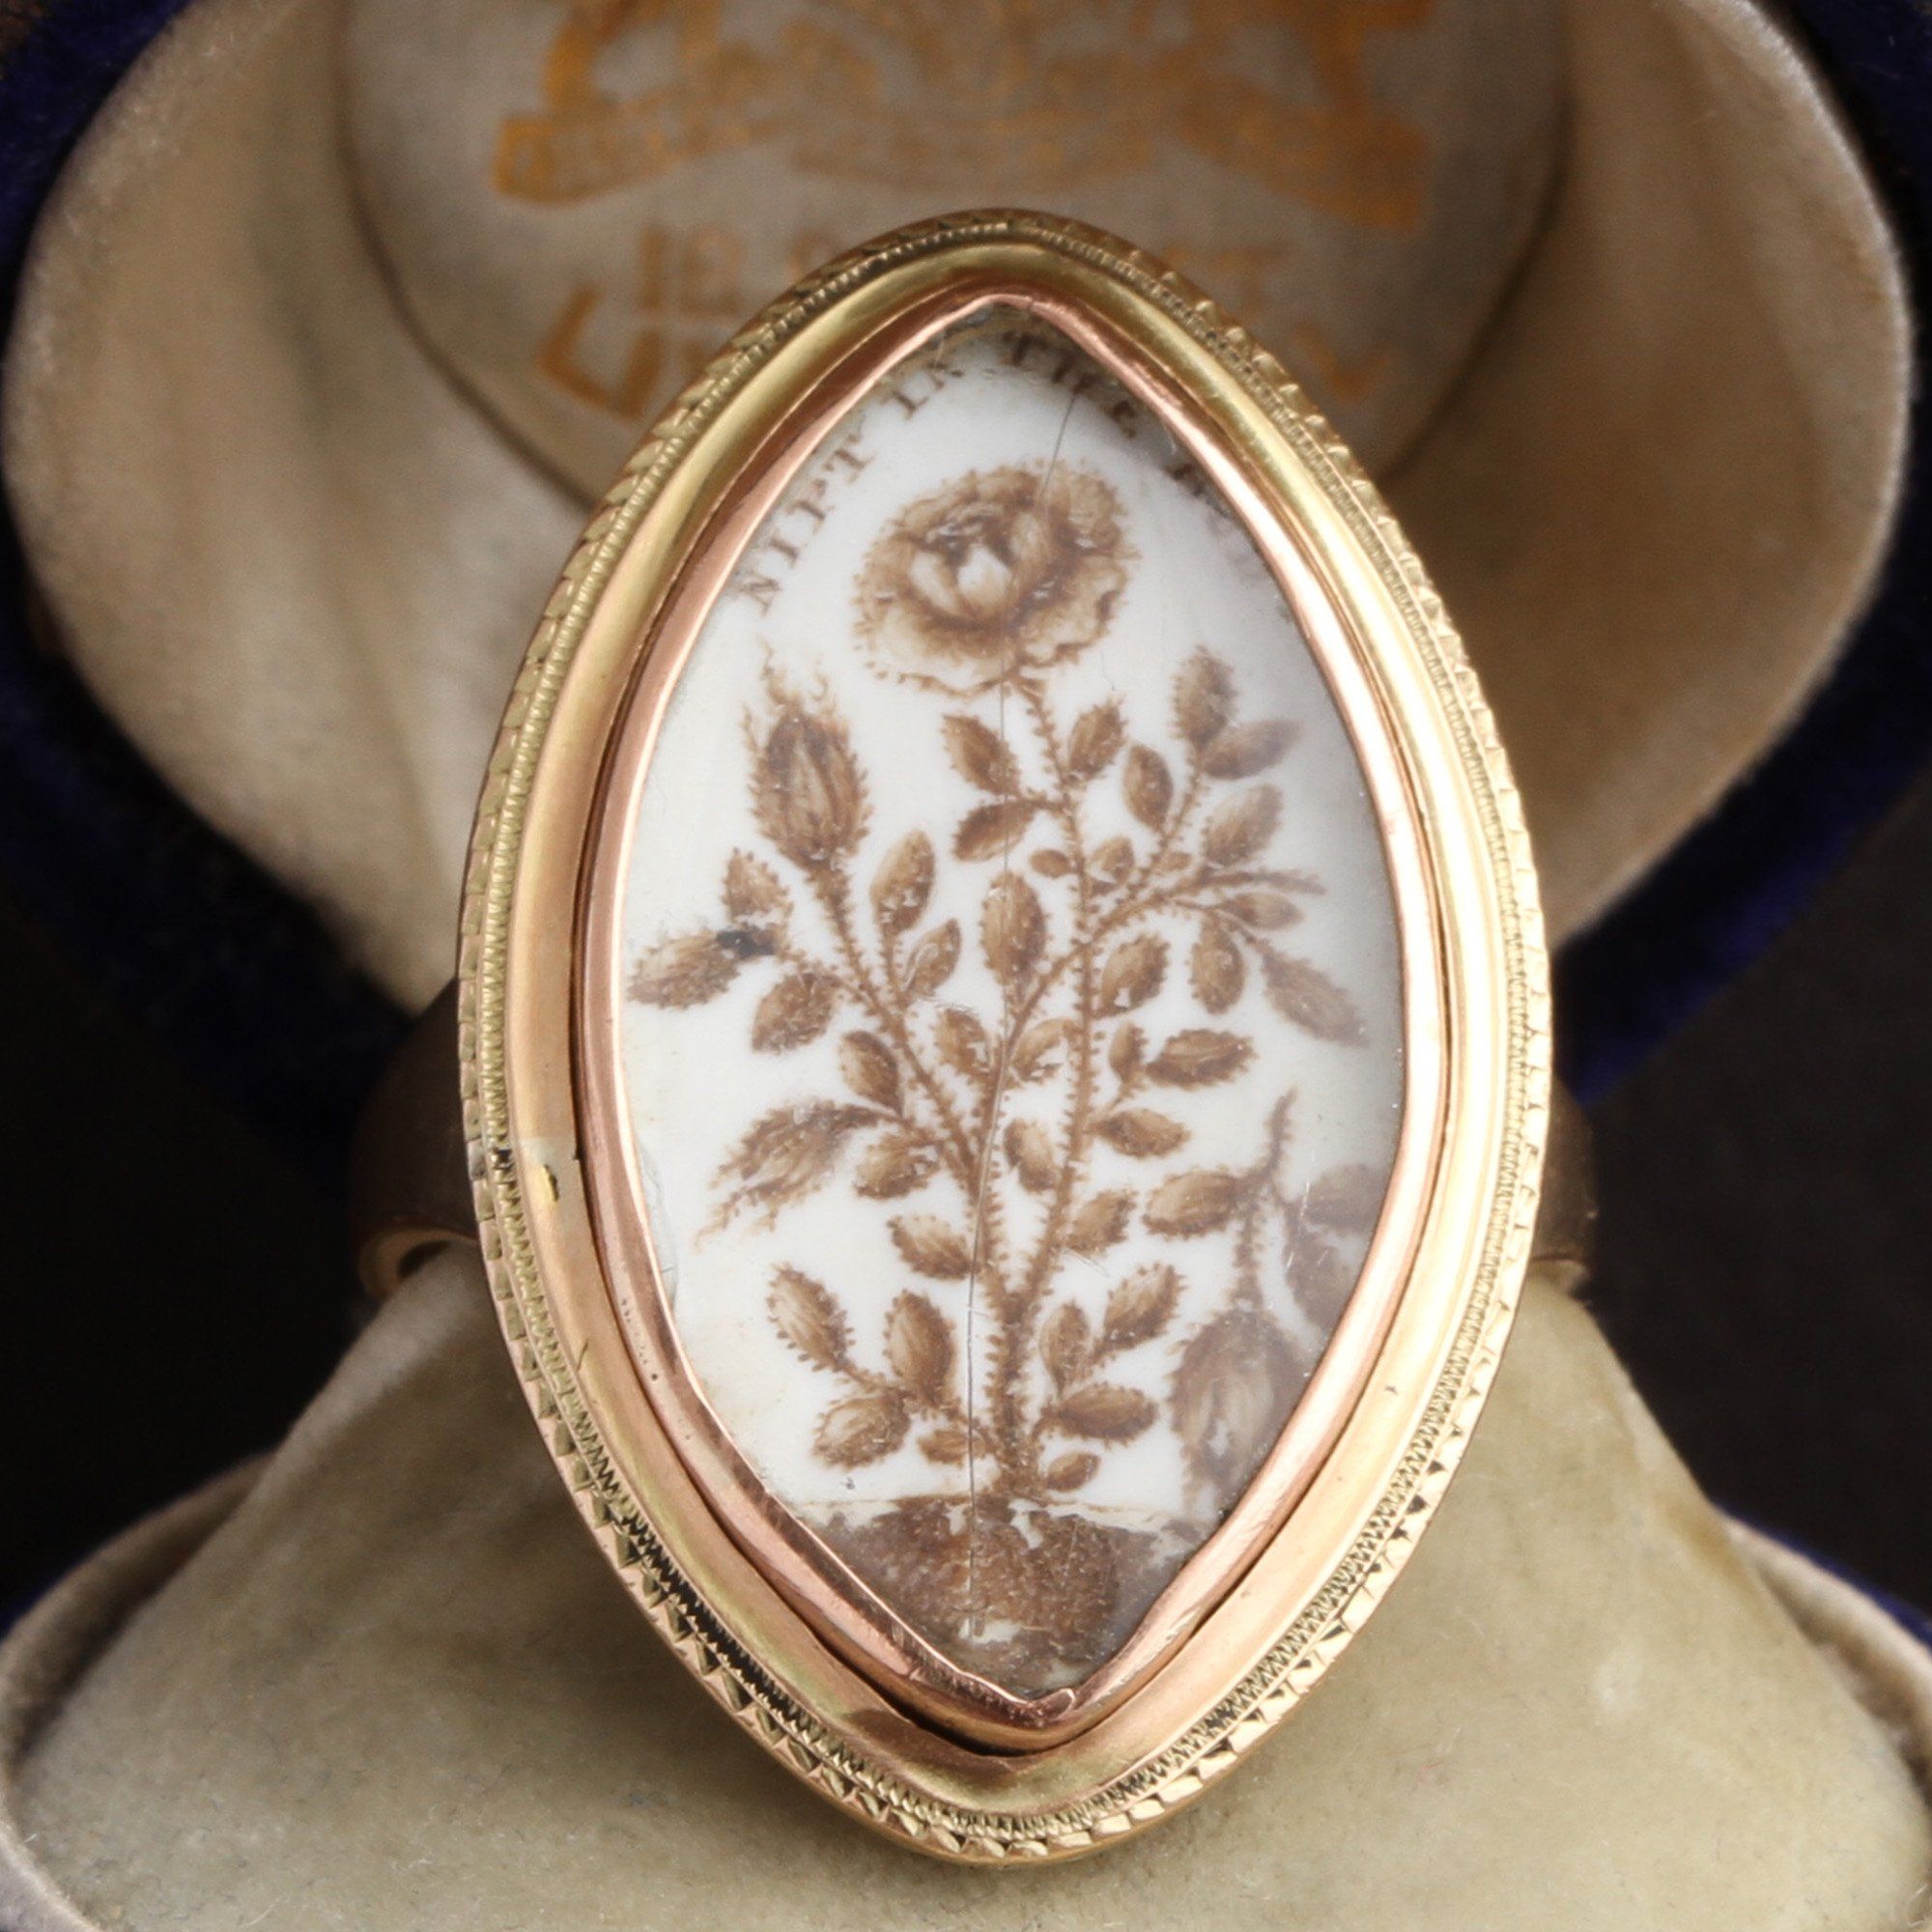 Face detail of Georgian "Nipt in the Bud" Sepia Mourning Ring